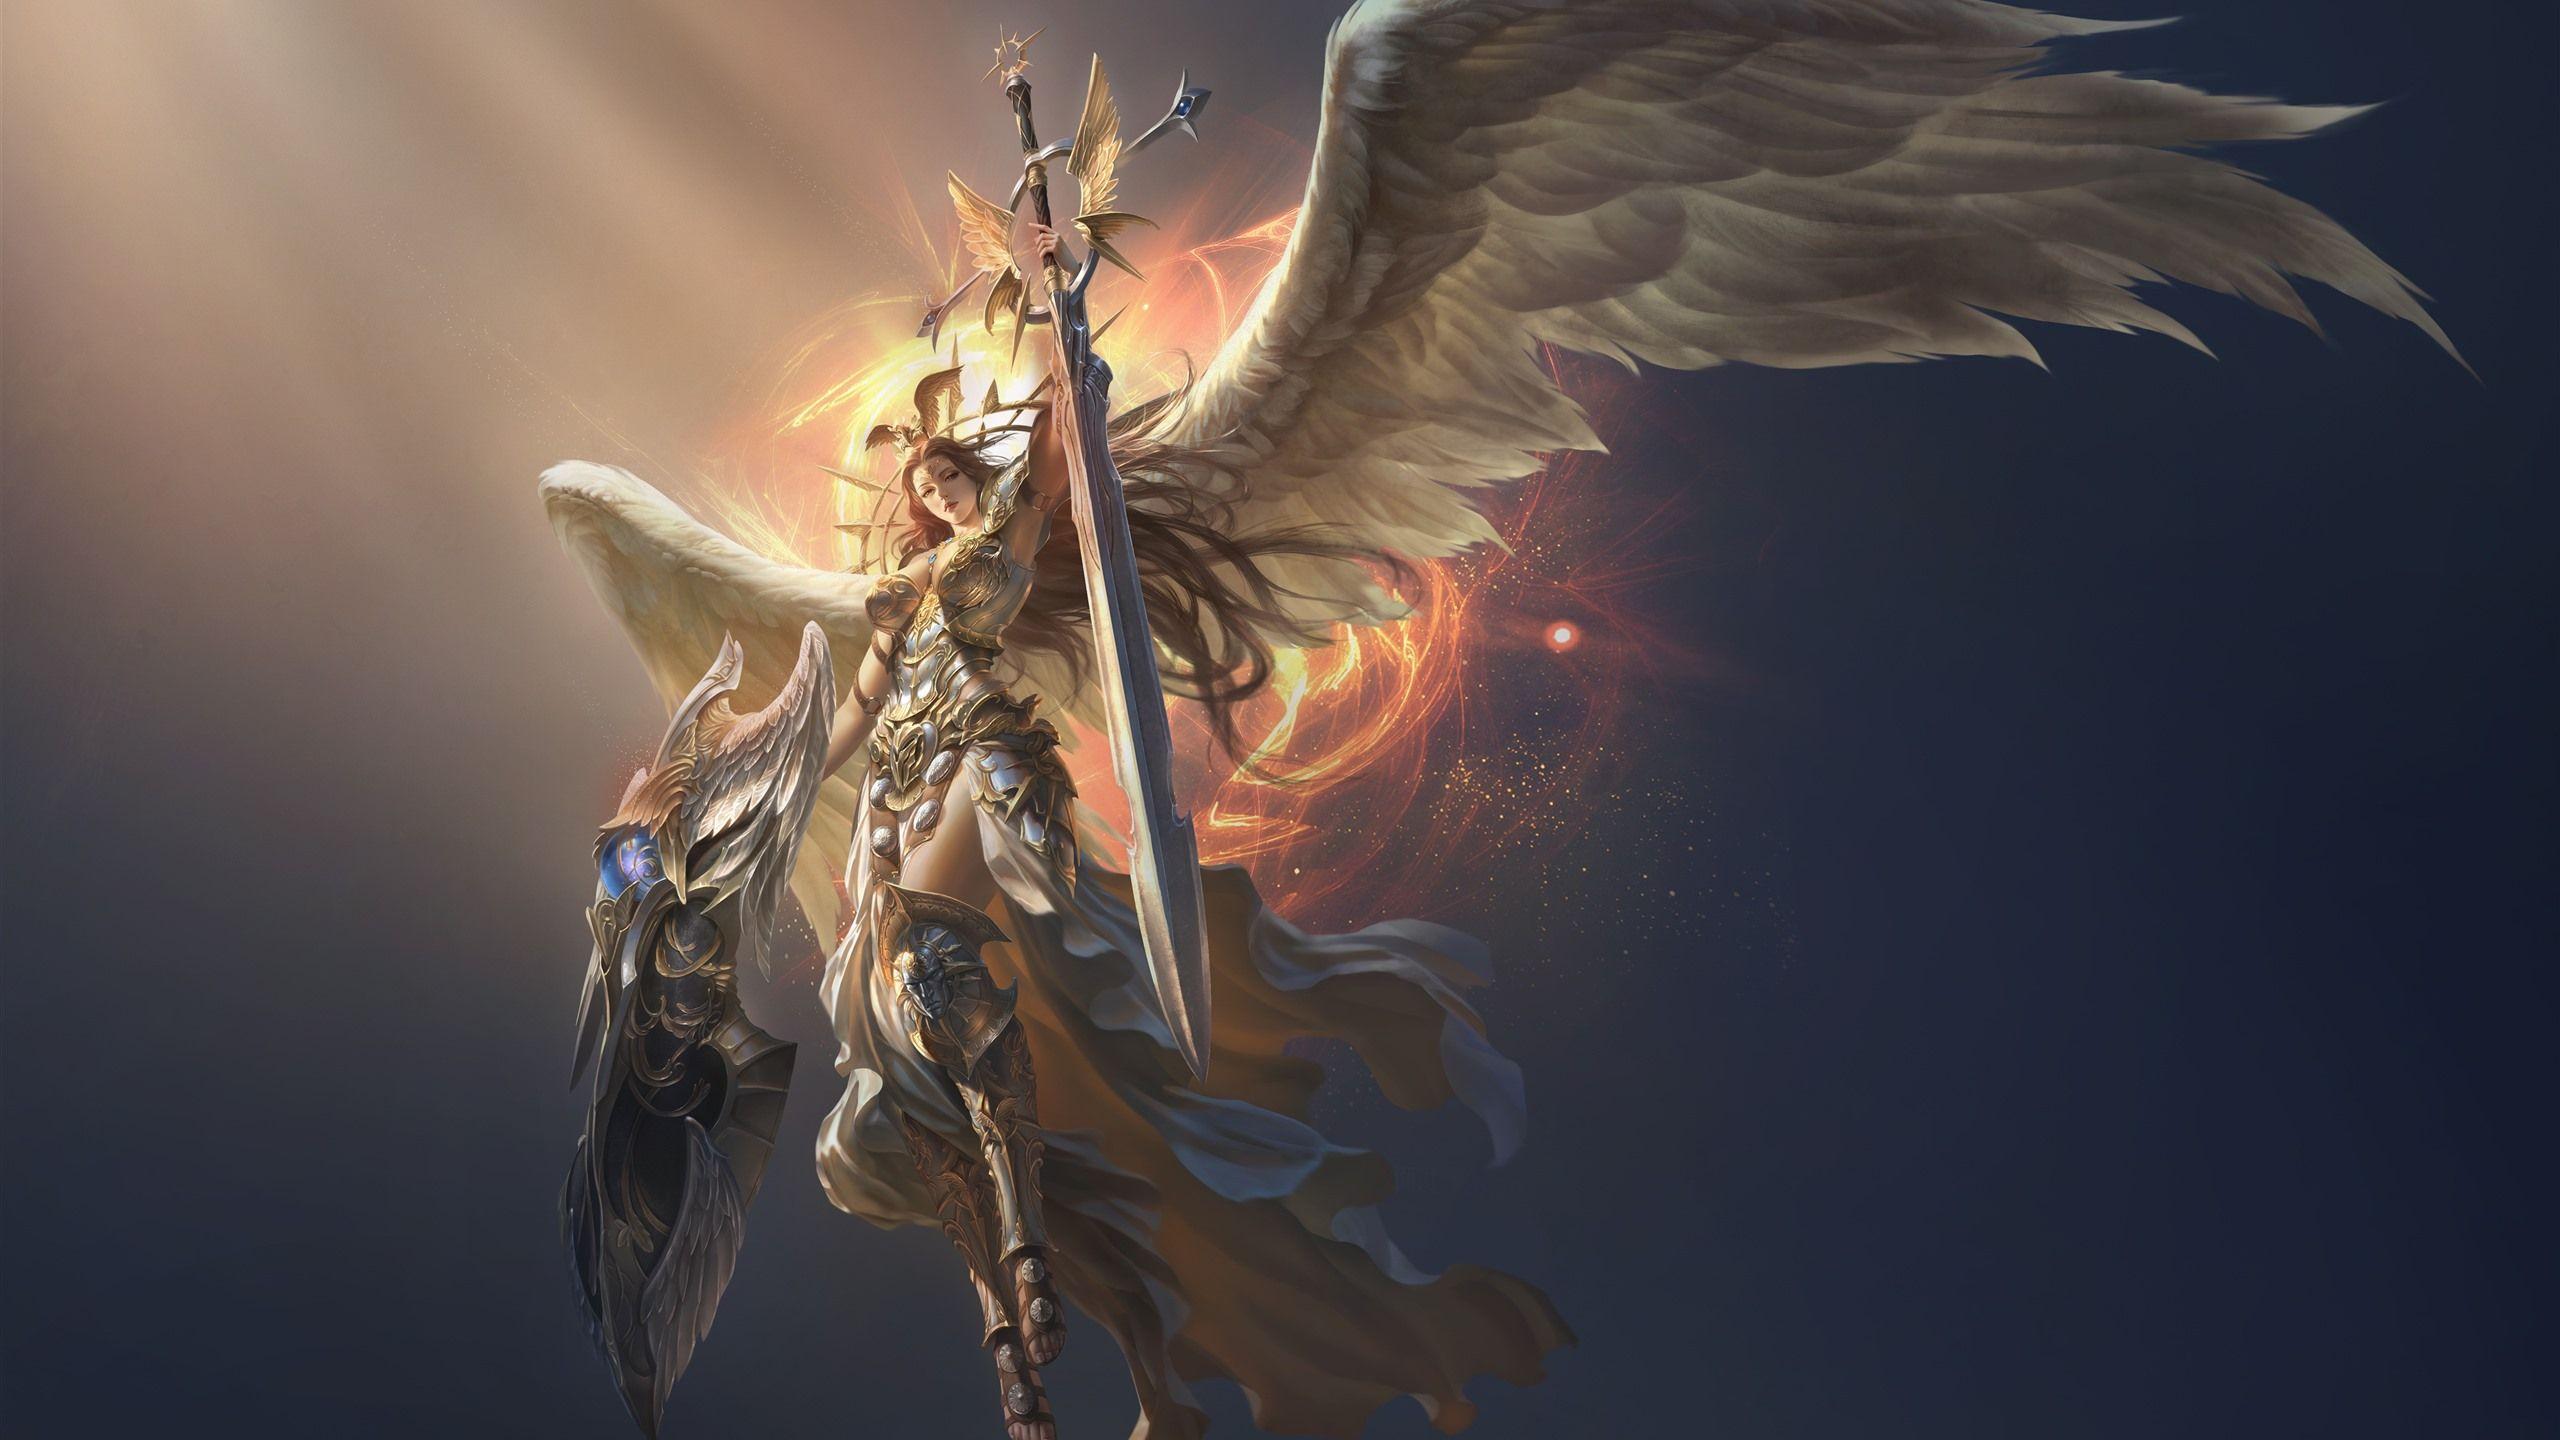 Angel 2560 X 1440 Wallpapers - Top Free Angel 2560 X 1440 Backgrounds ...